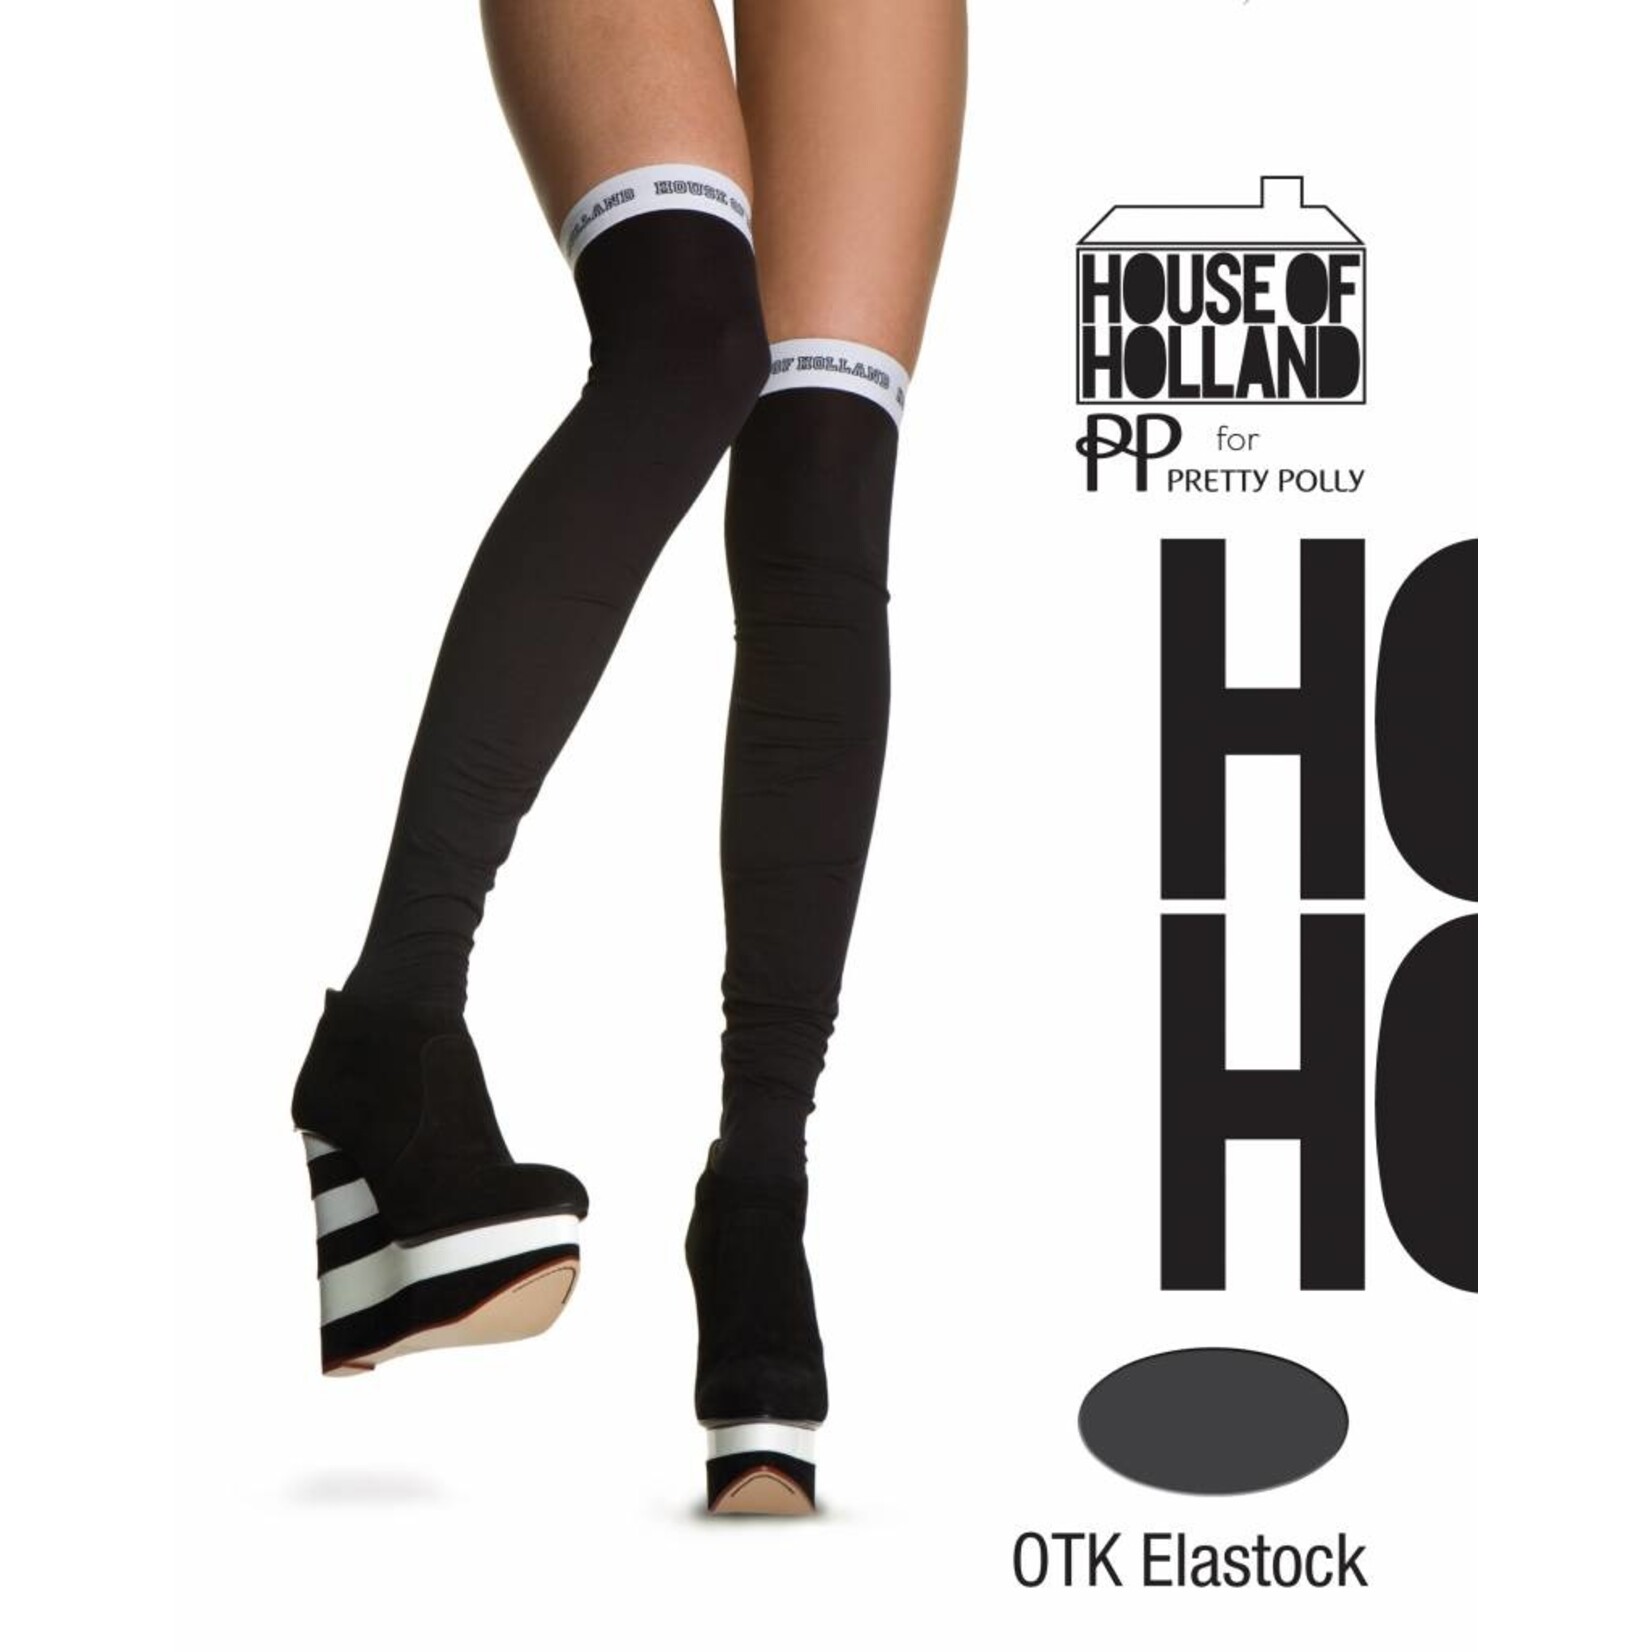 House of Holland House of Holland Over The Knee Elastock